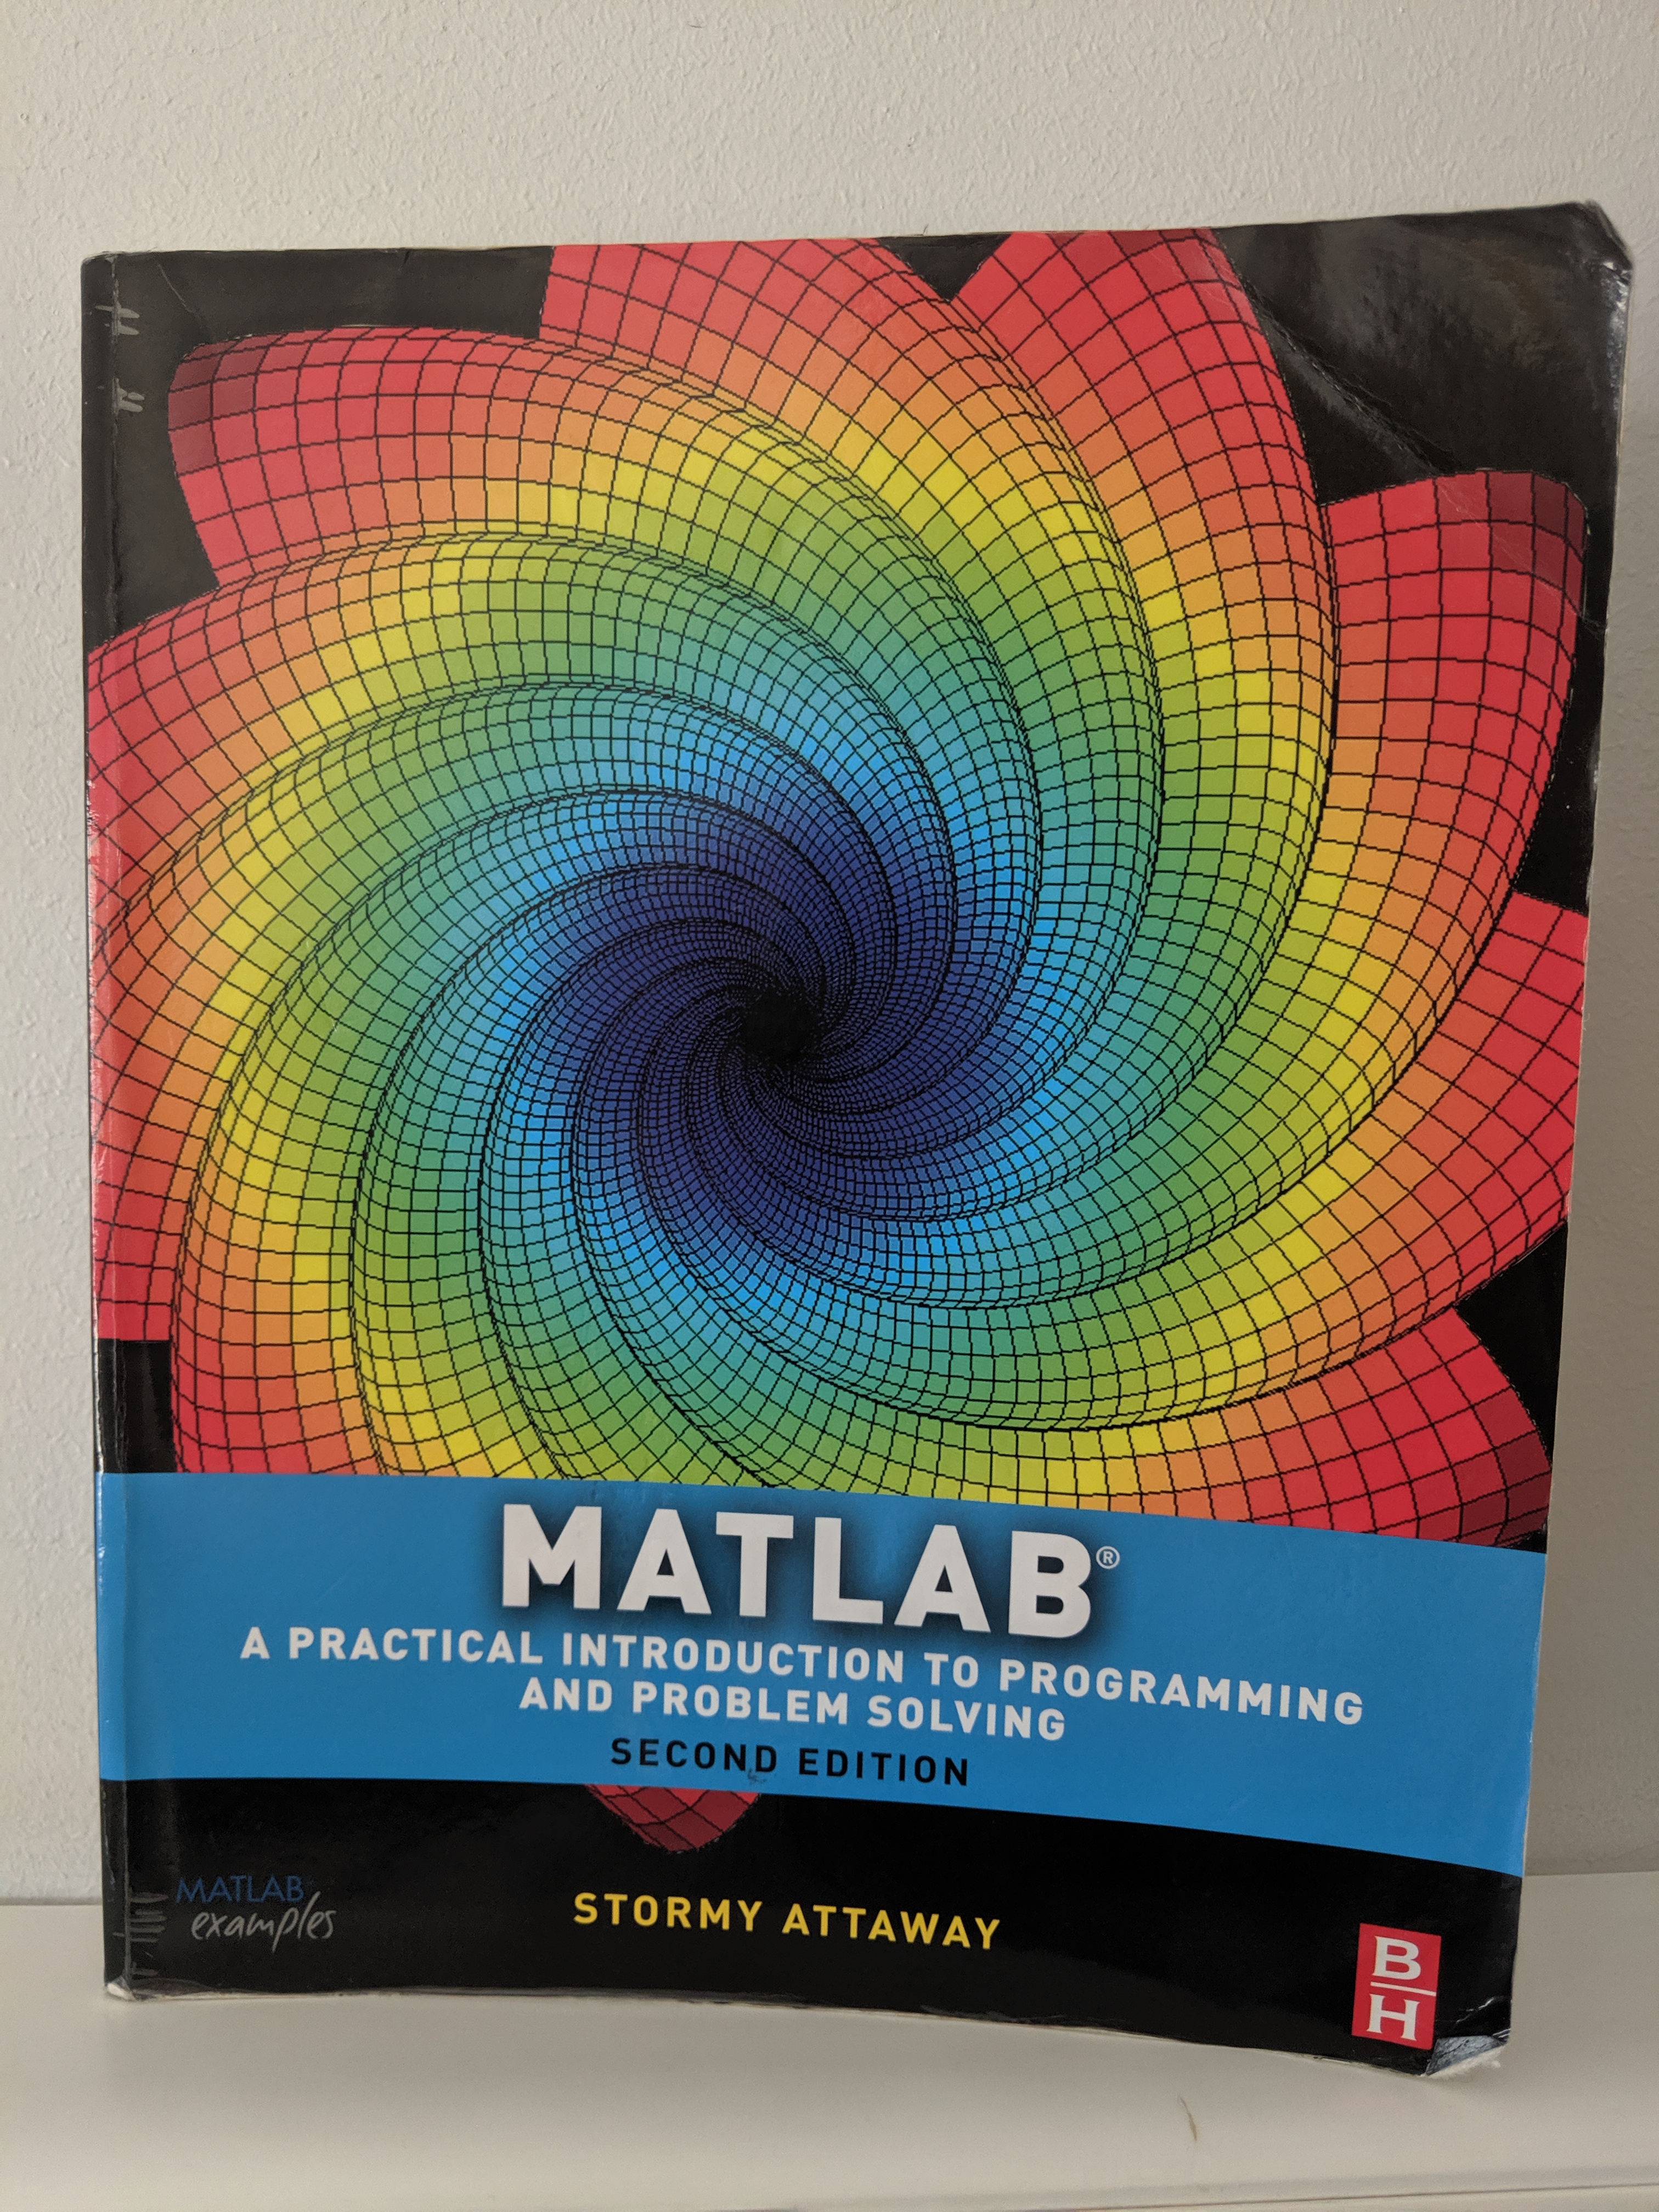 MATLAB: a practical introduction to programming and problem solving